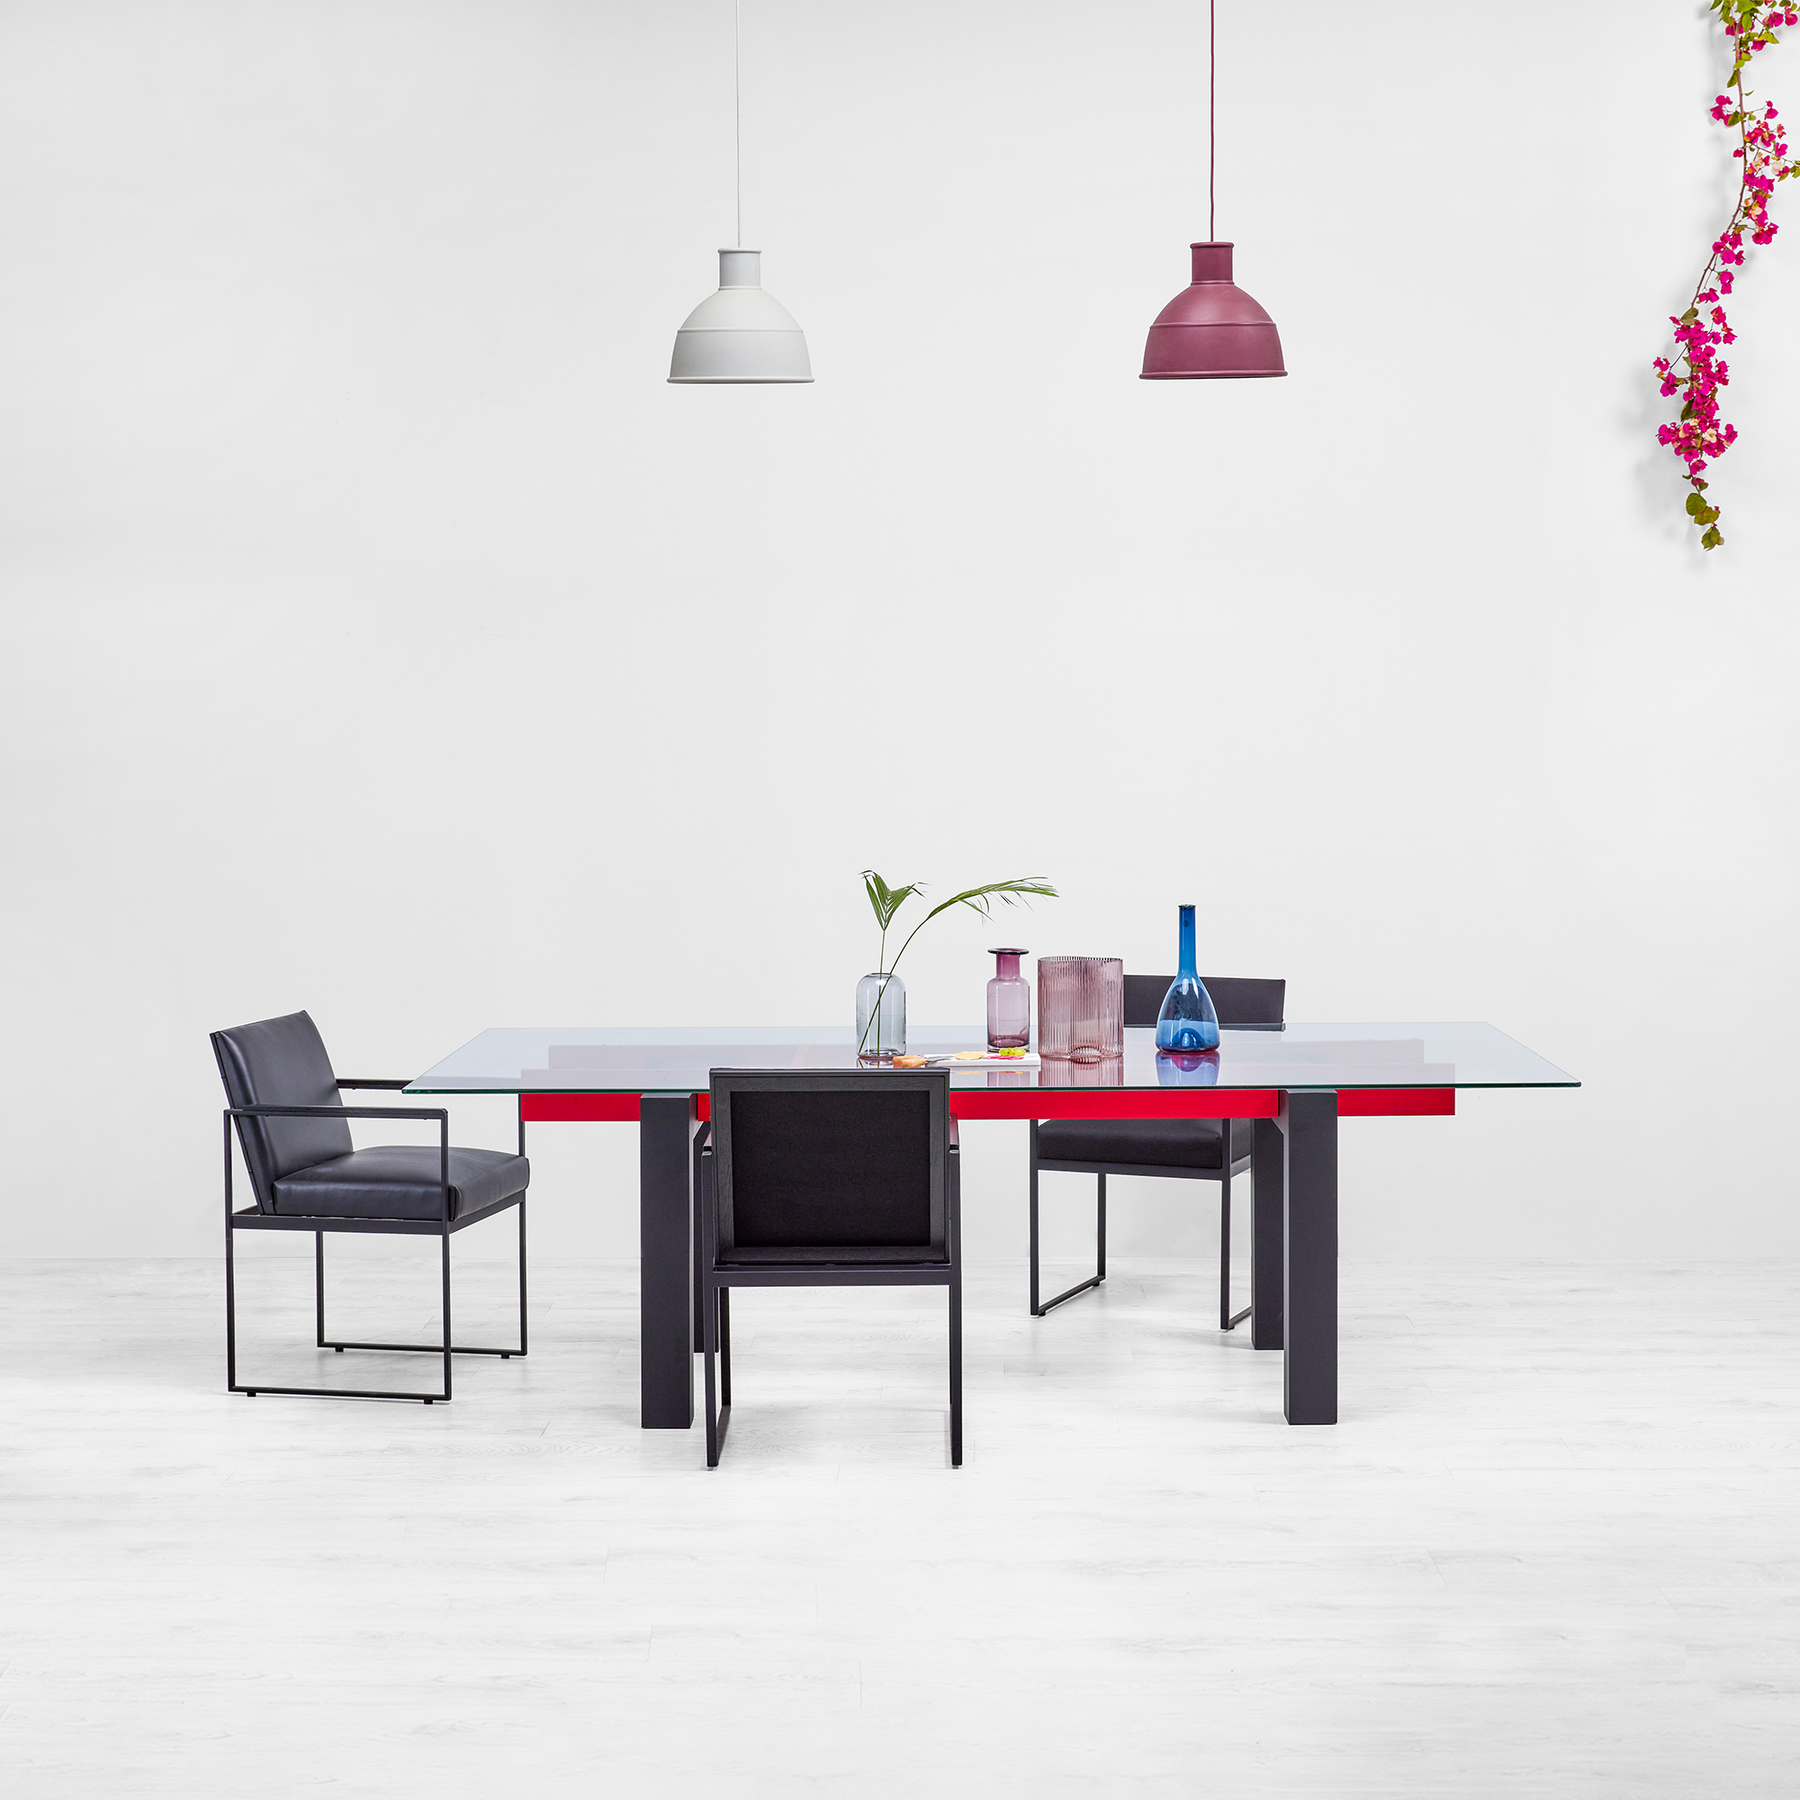 Beam Dining Table - 6 Seater